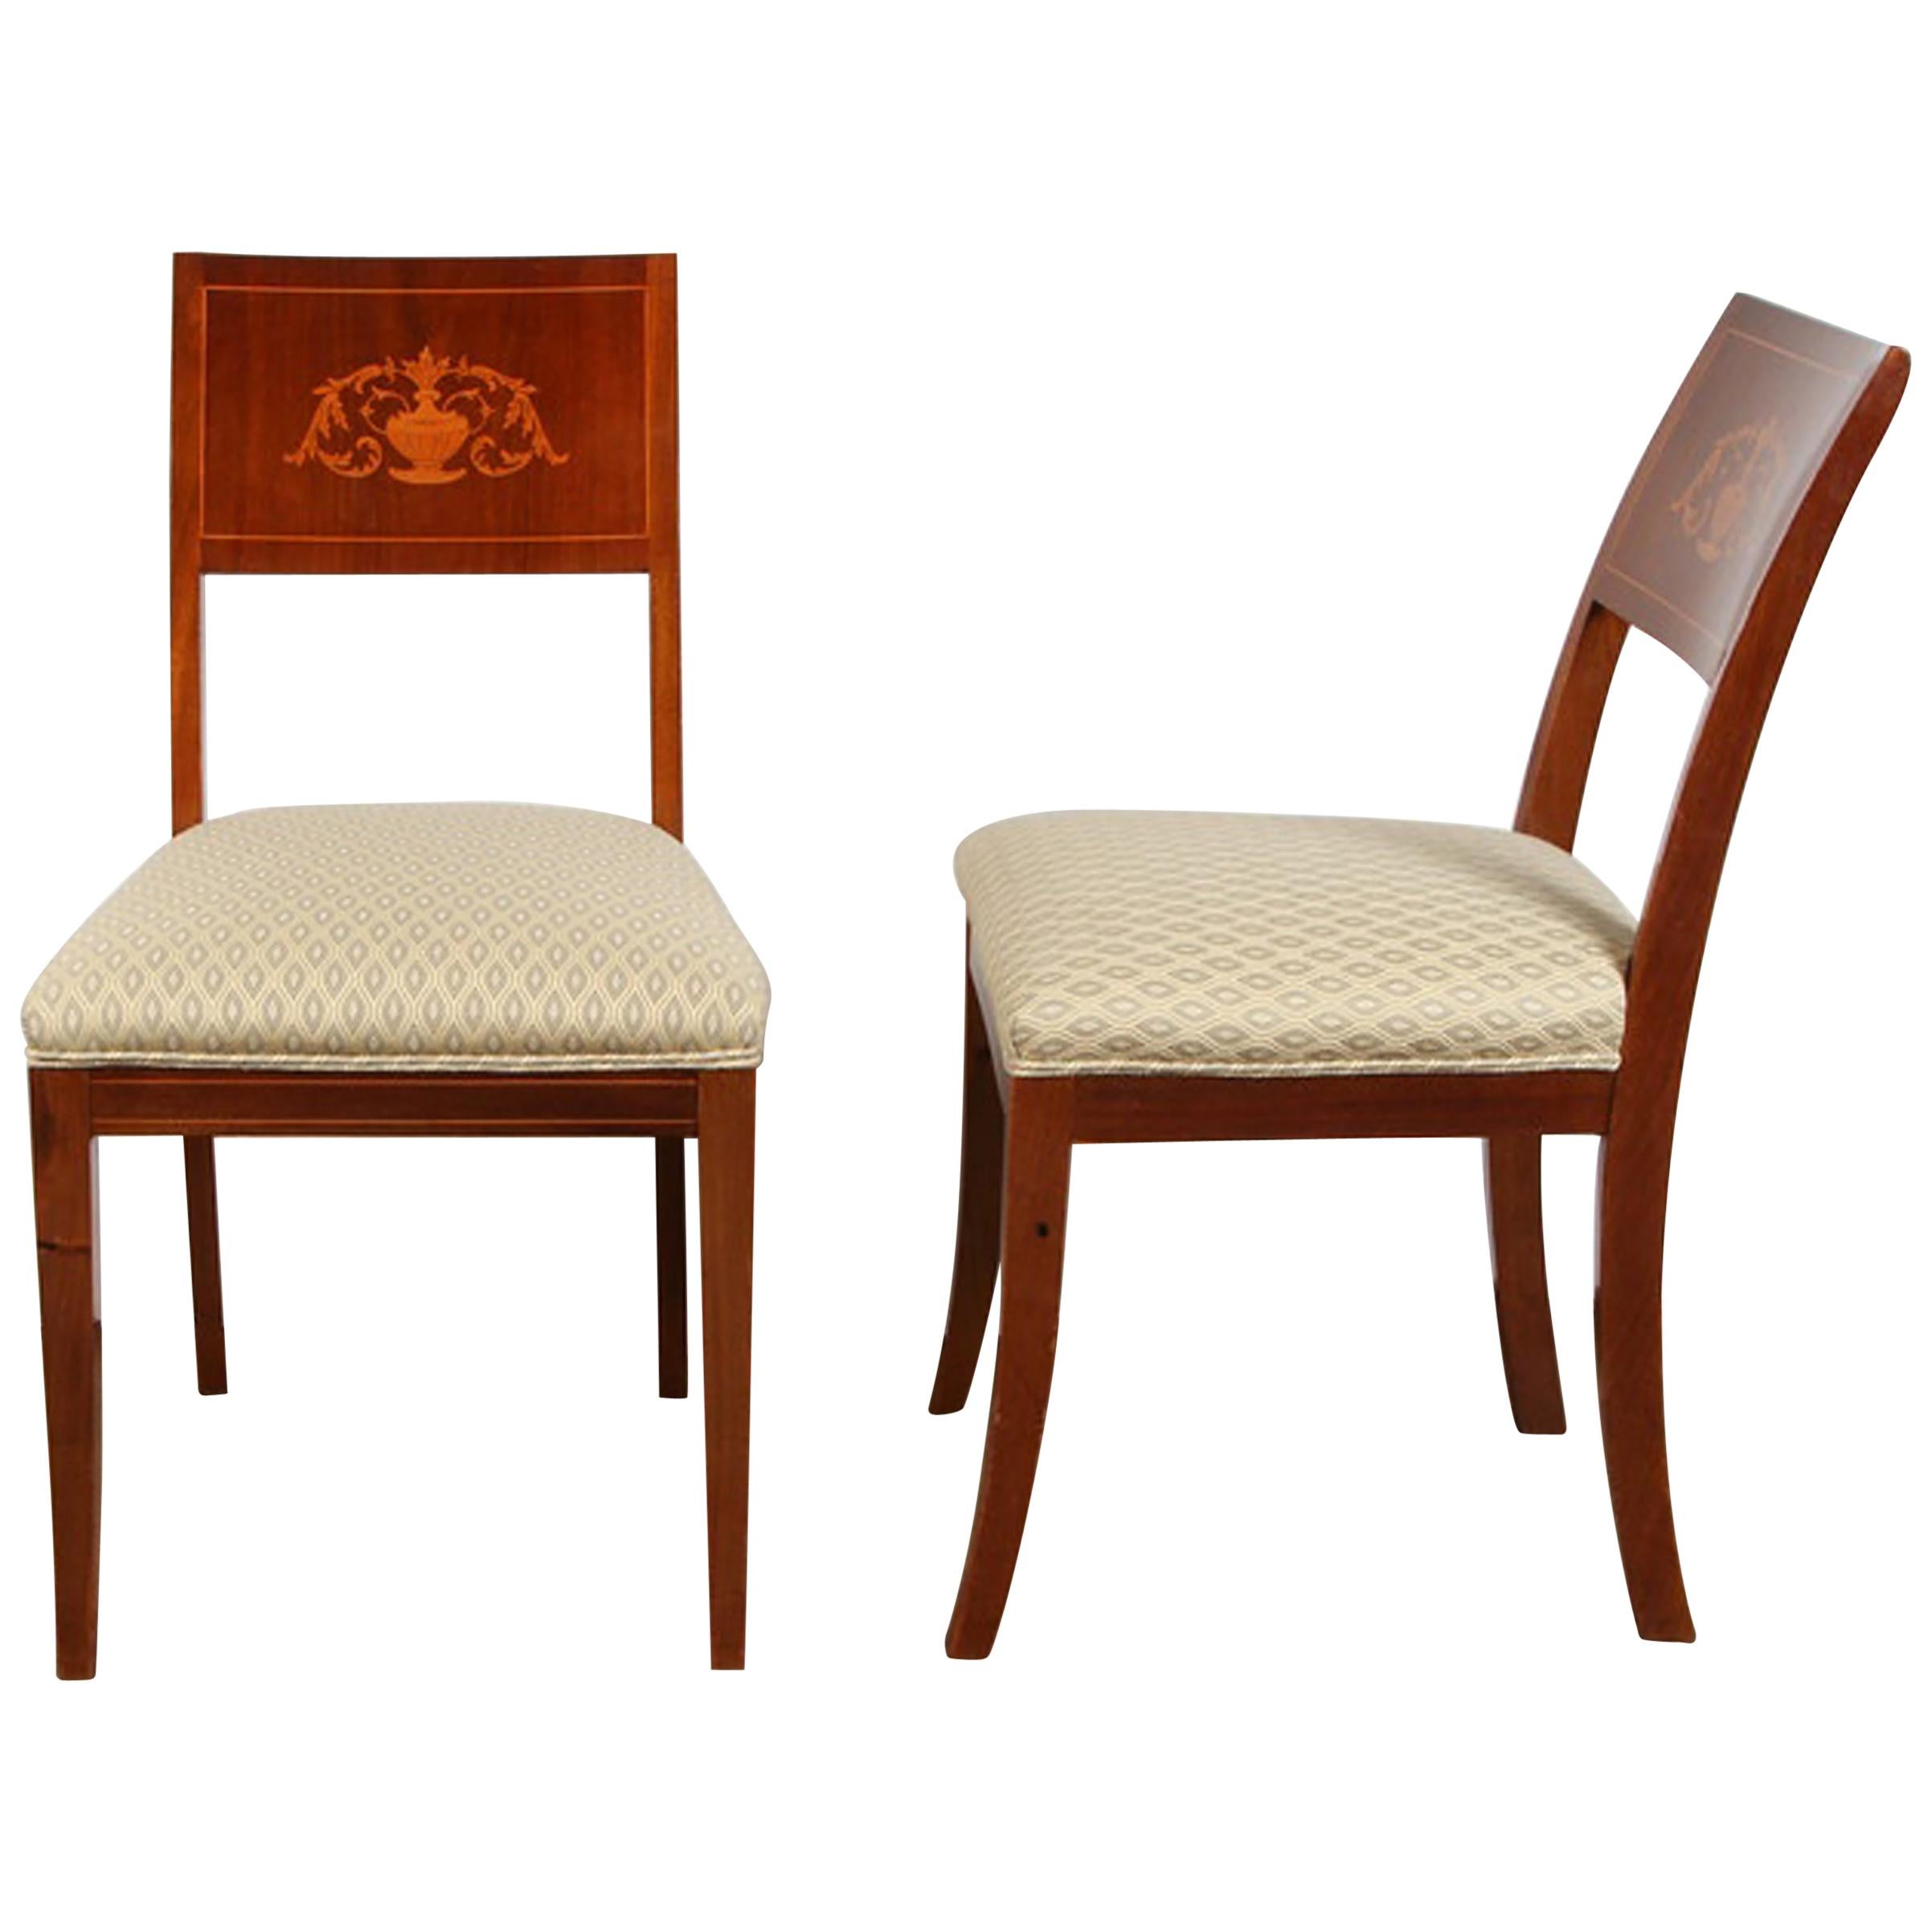 Pair of Danish Neoclassical Marquetry Chairs, 19th Century